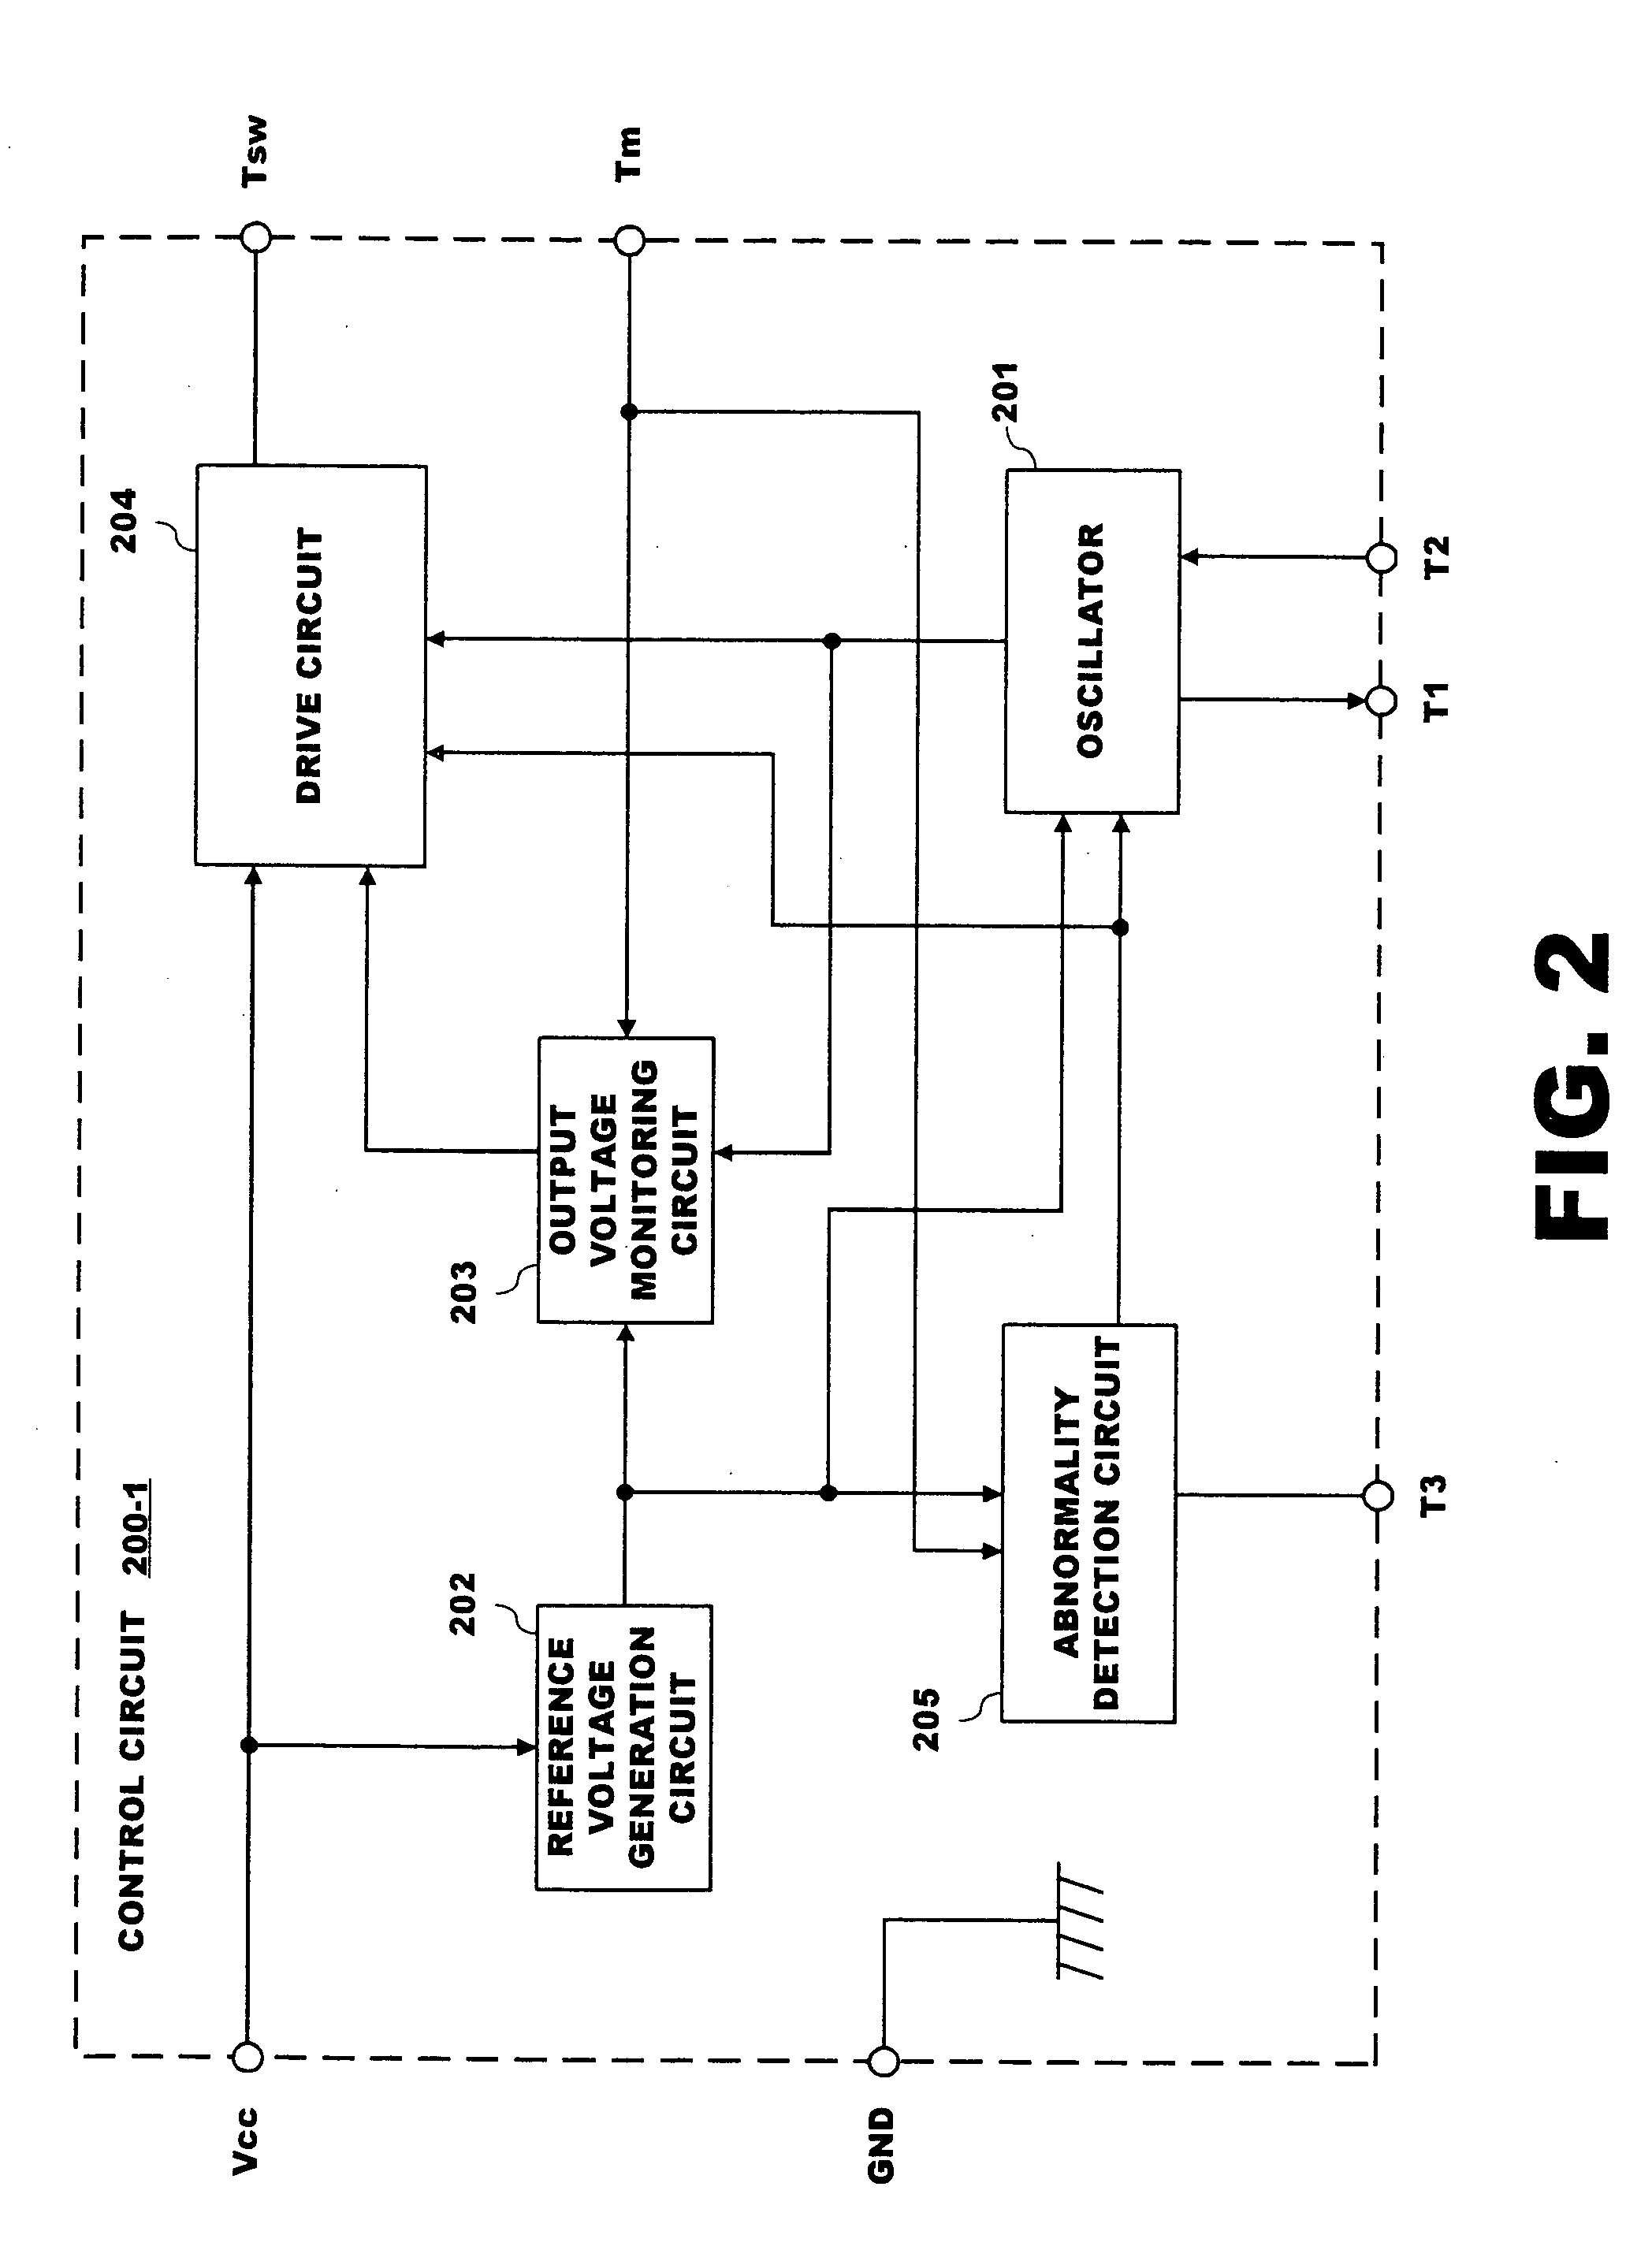 Power source apparatus supplying multiple output